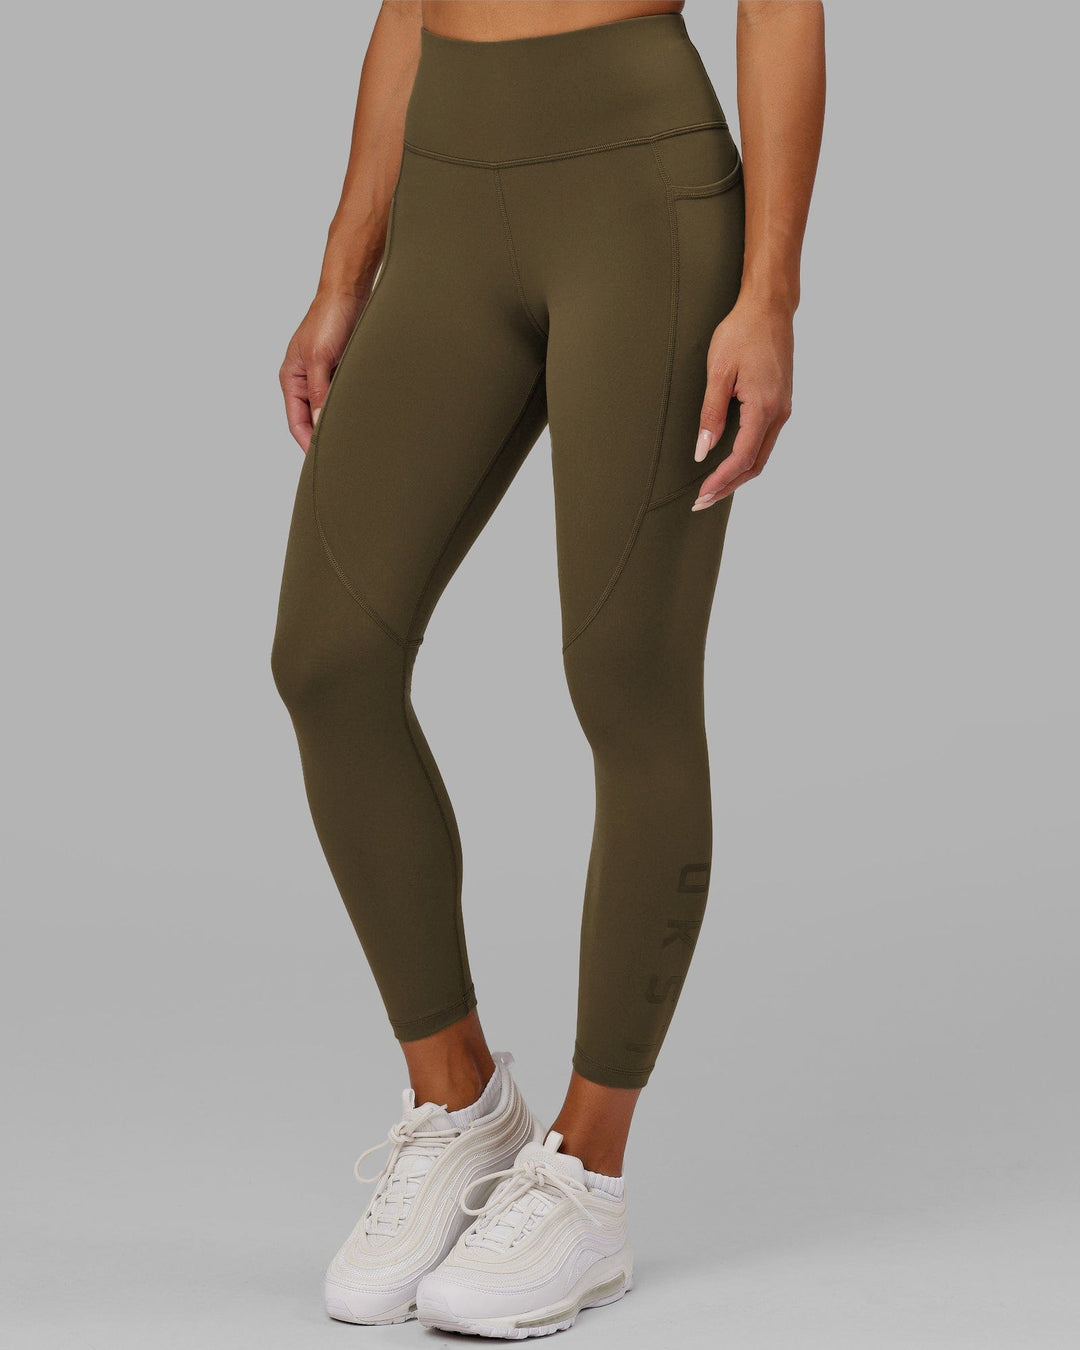 Rep 7/8 Length Tights - Army Green